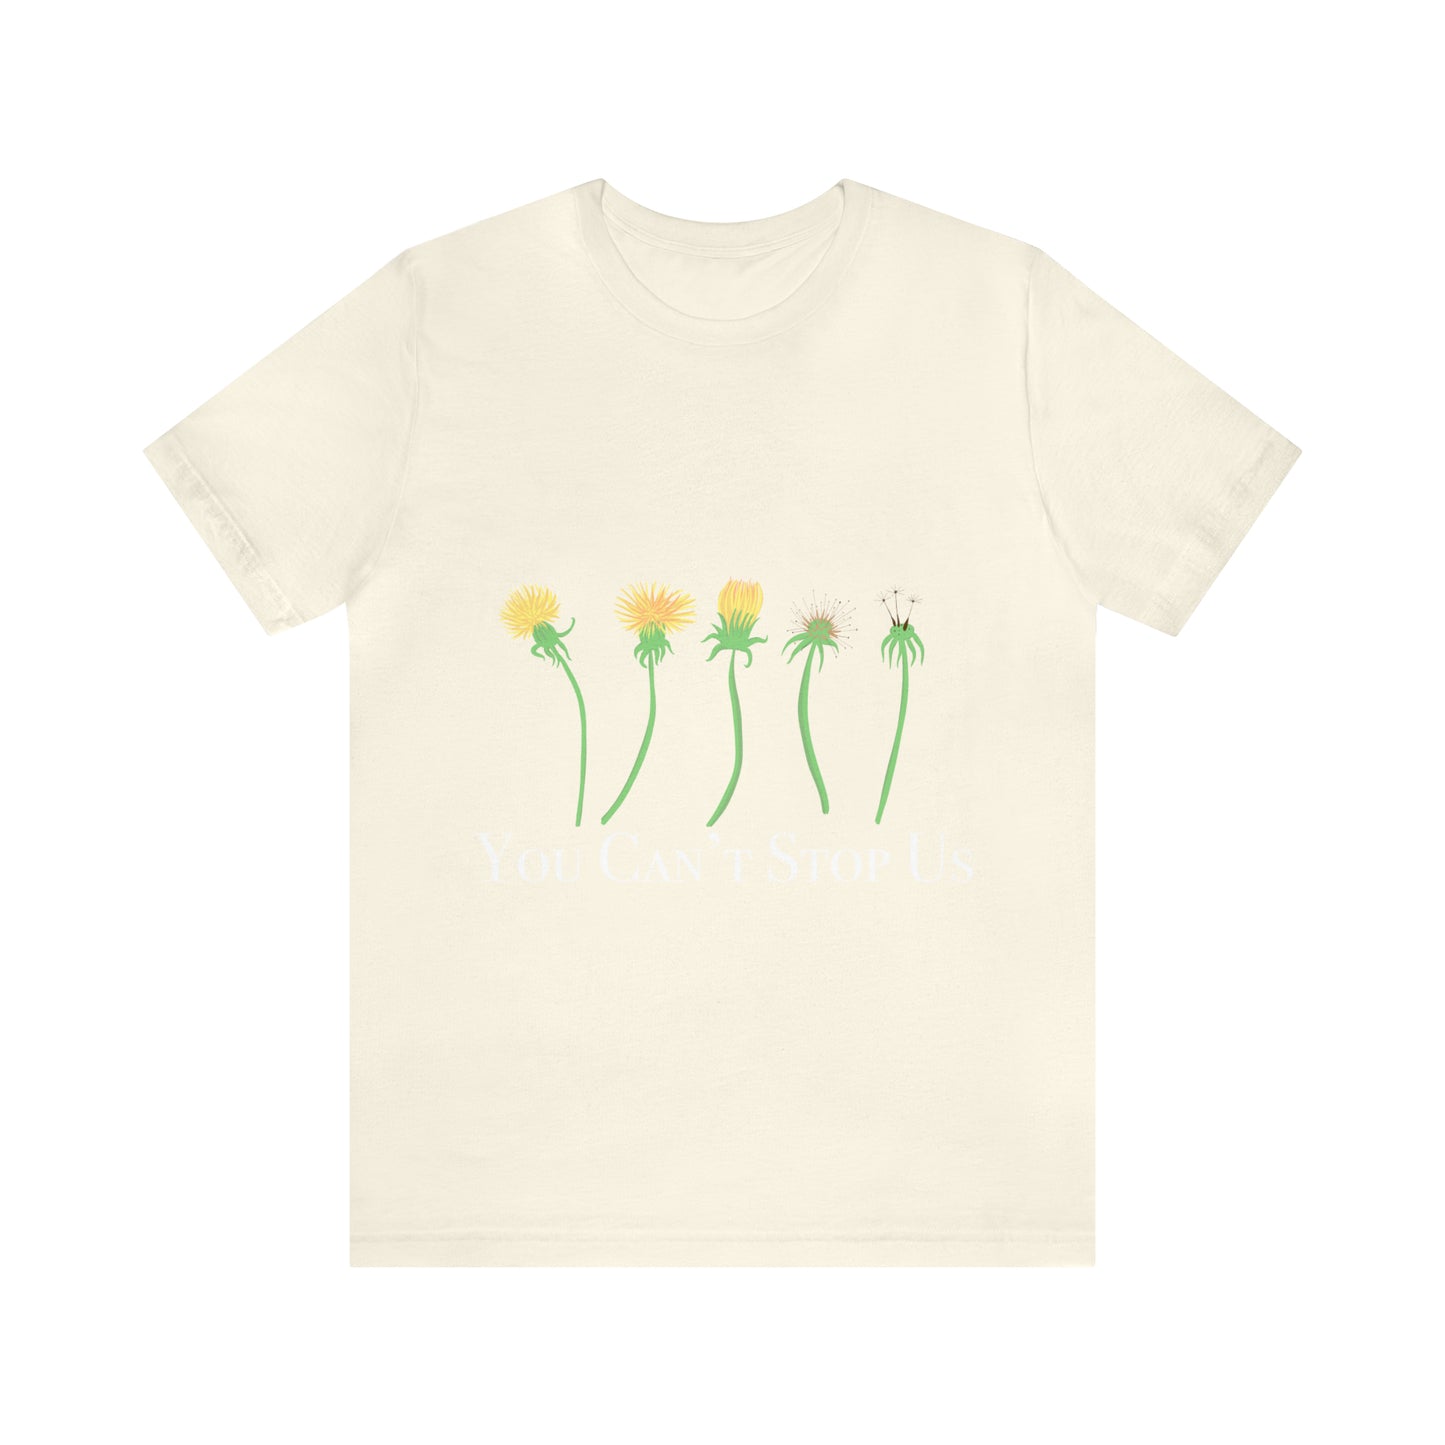 You Can't Stop Us Dandelion Unisex Tee